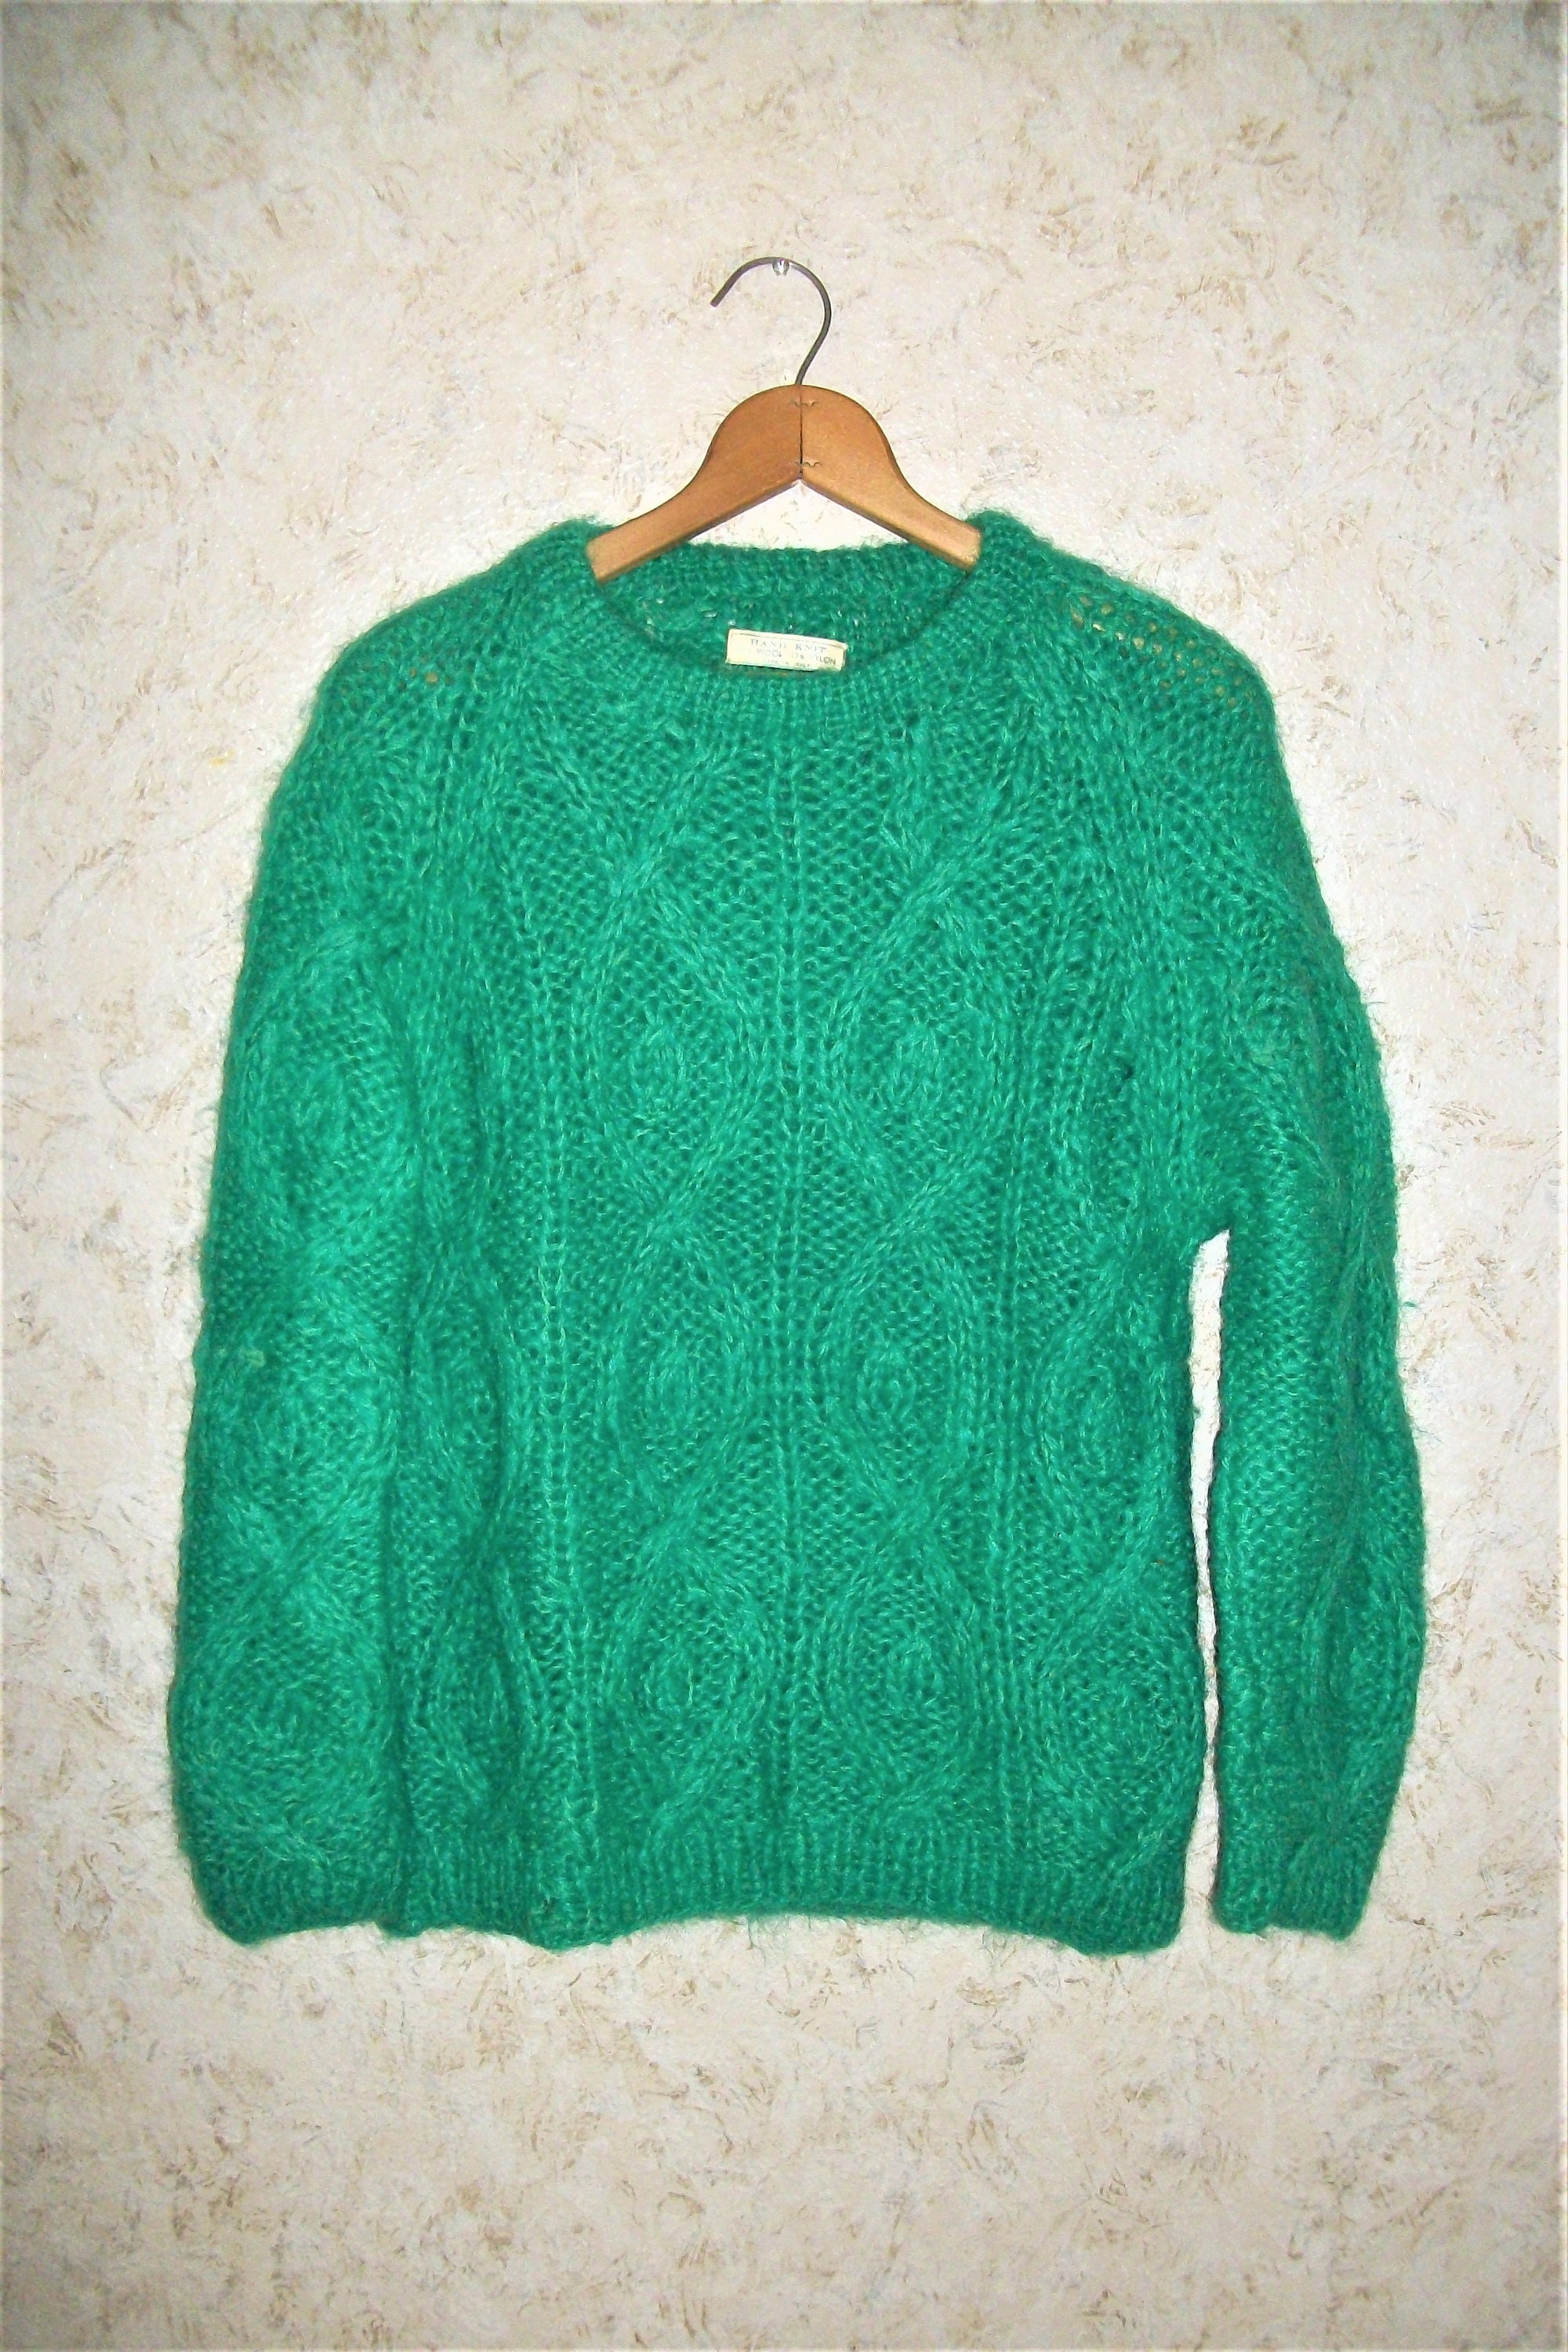 70S Wool Blend Green Chunky Knit Sweater Made in Italy Crew Neck Boho Grunge Emerald Winter Warm Pullover Womens Medium